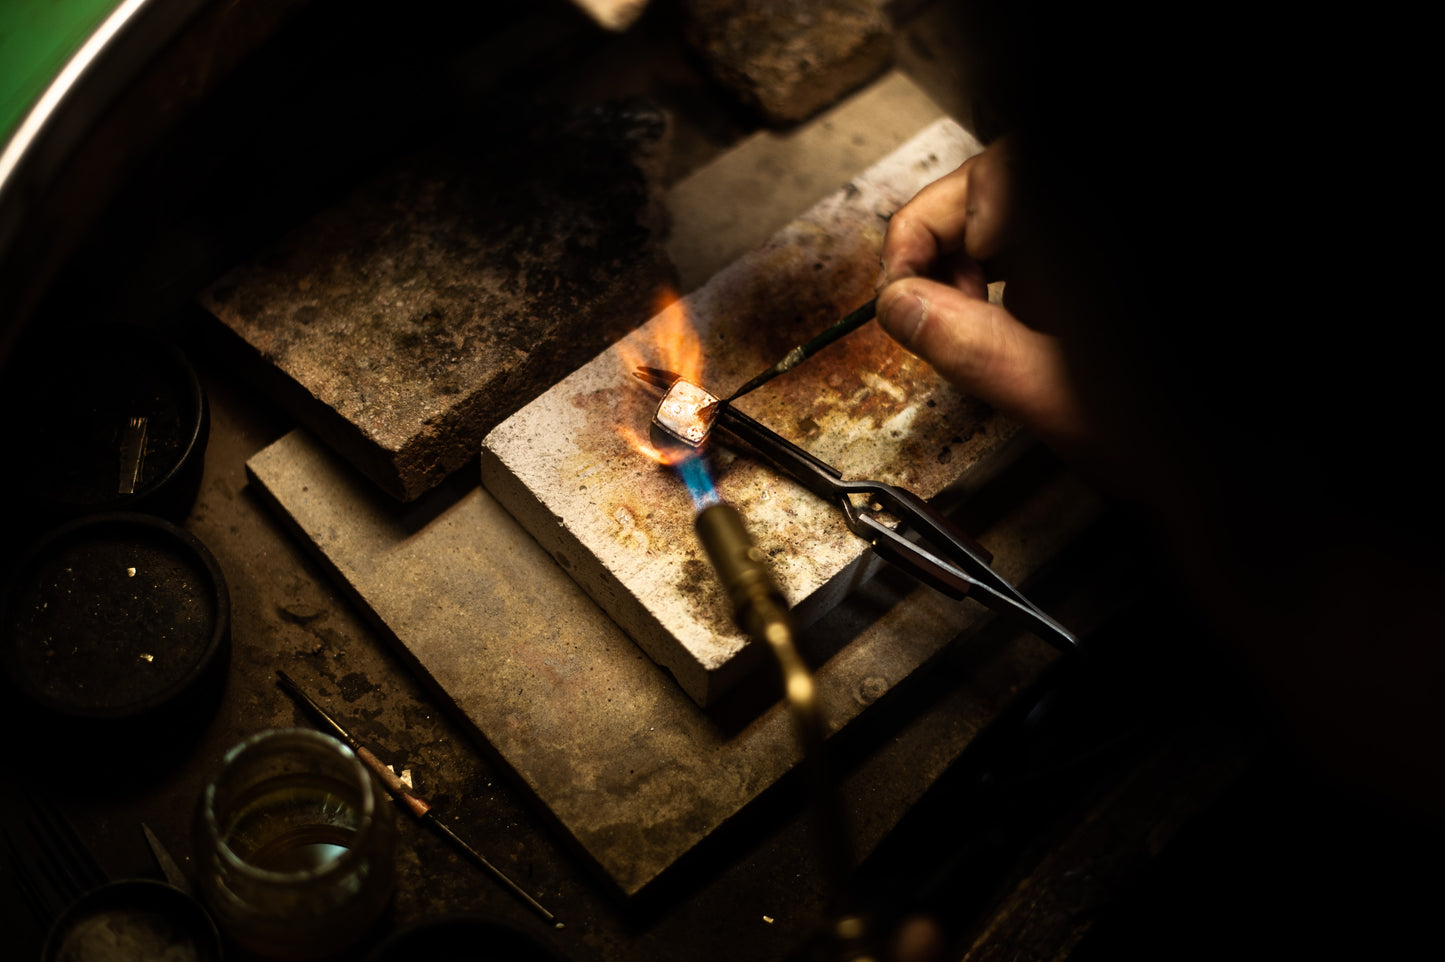 Kaya Jewelers: How Our Fine Craftsmanship Makes Us Stand Out